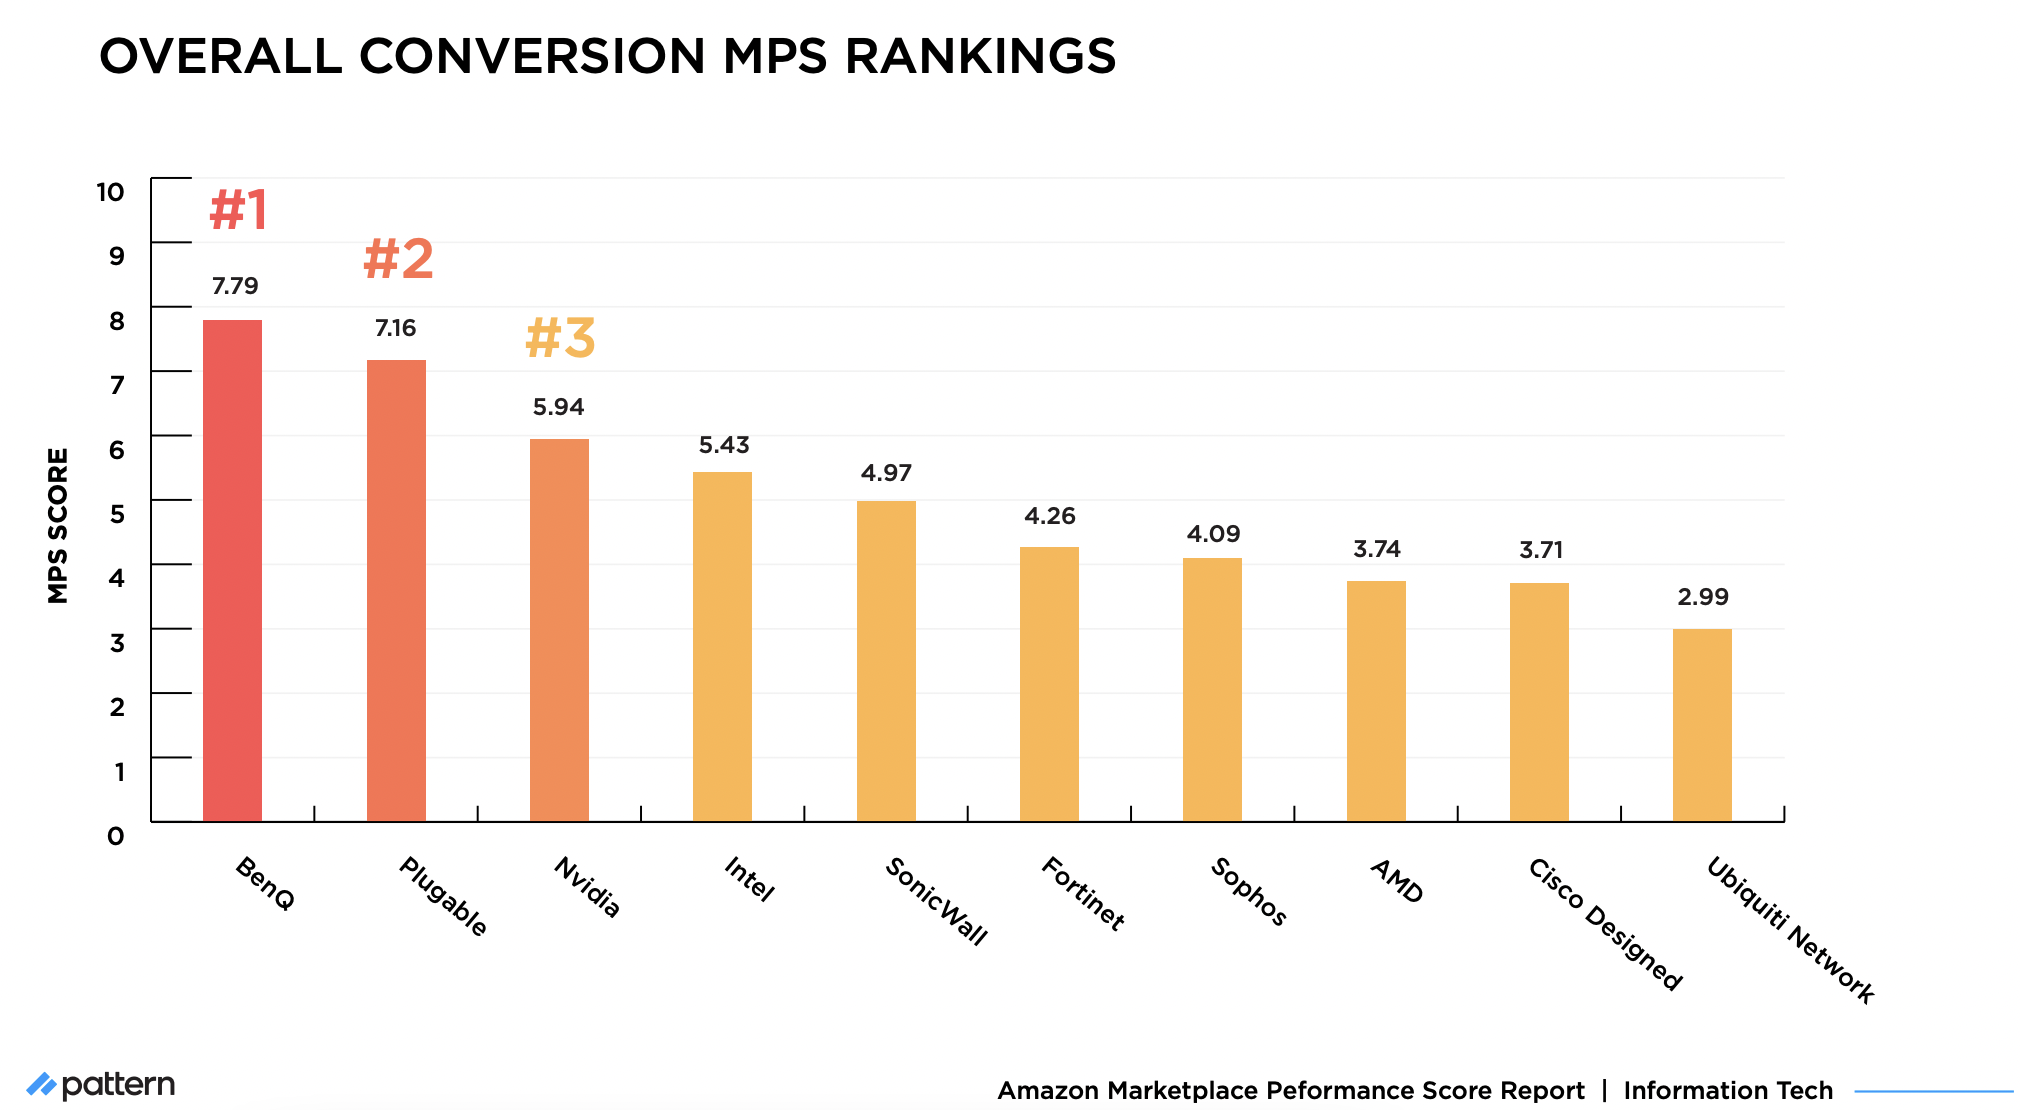 Marketplace Performance Score: Updated Information Tech Overall Conversion Rankings